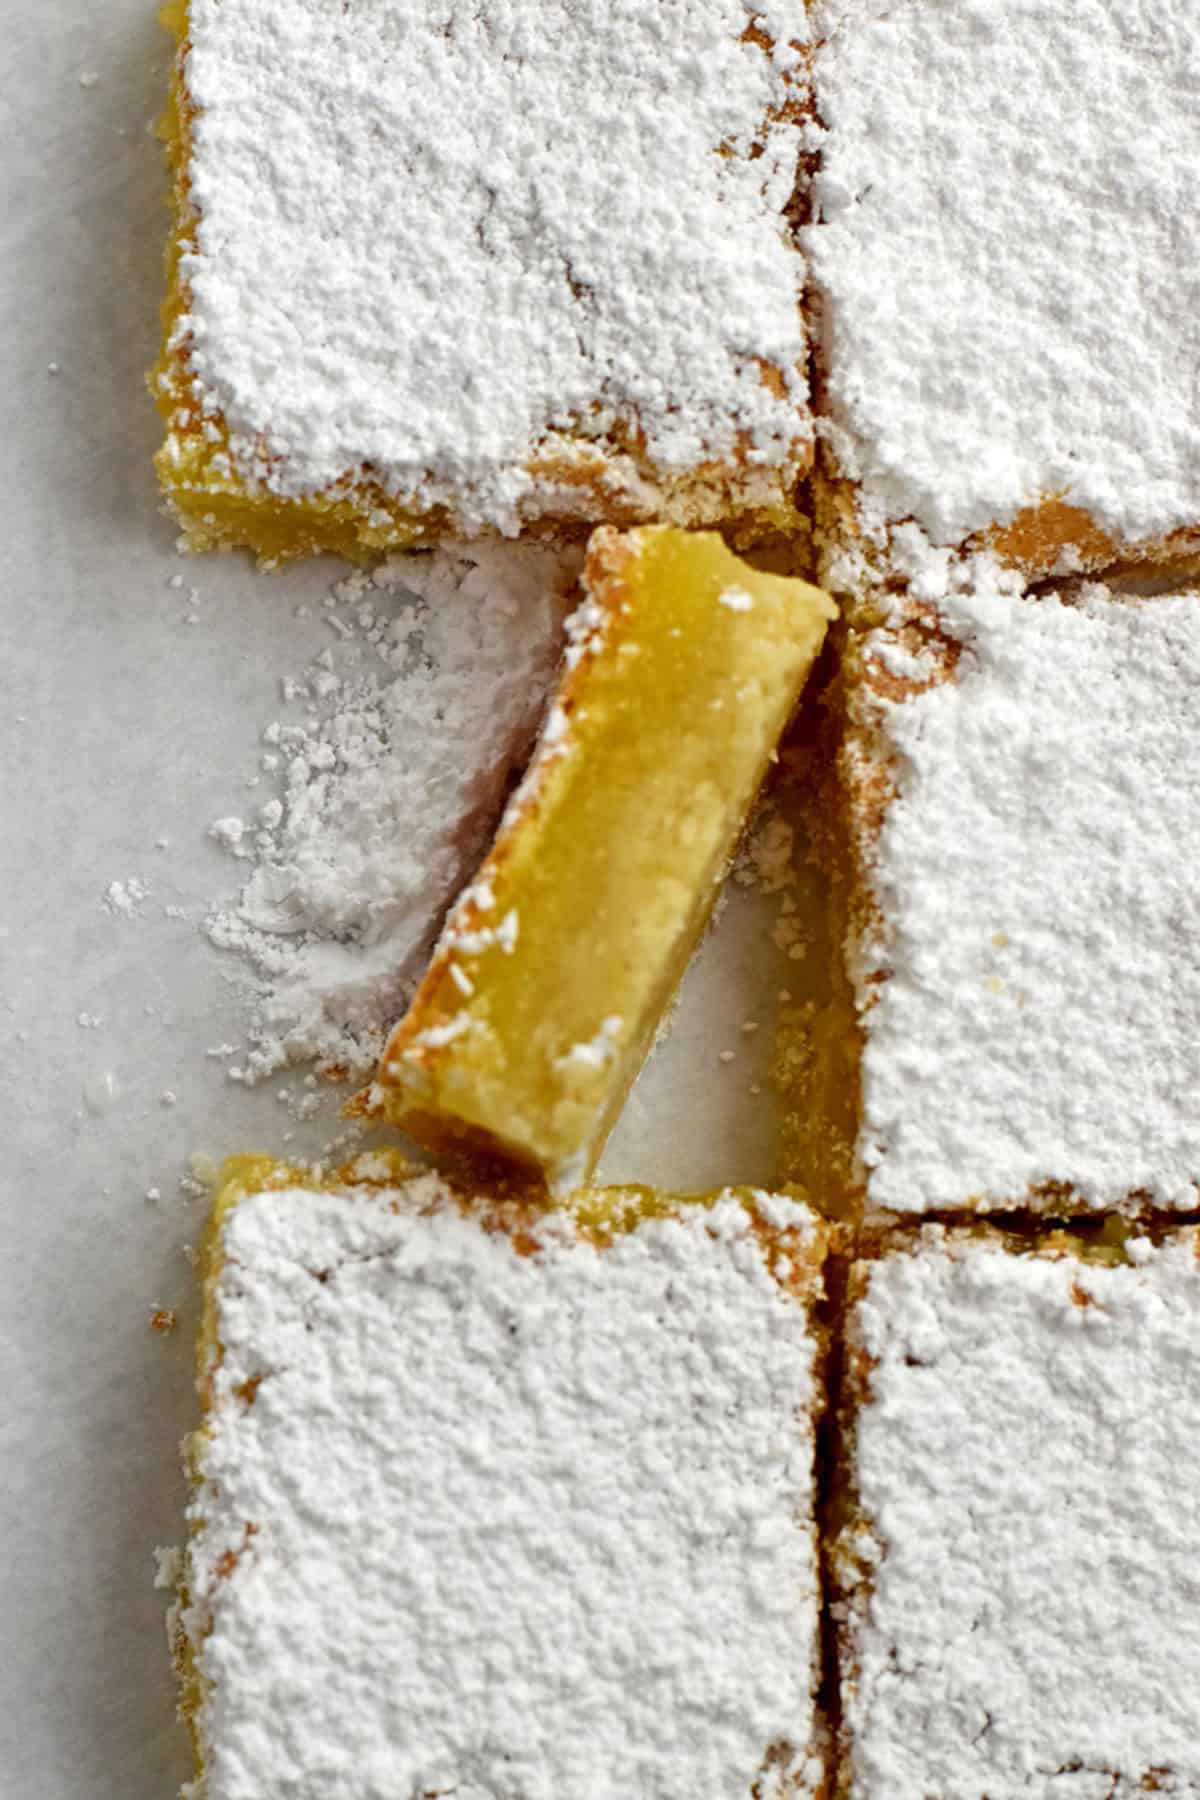 Gluten free lemon bars with one on its side to show lemon filling.